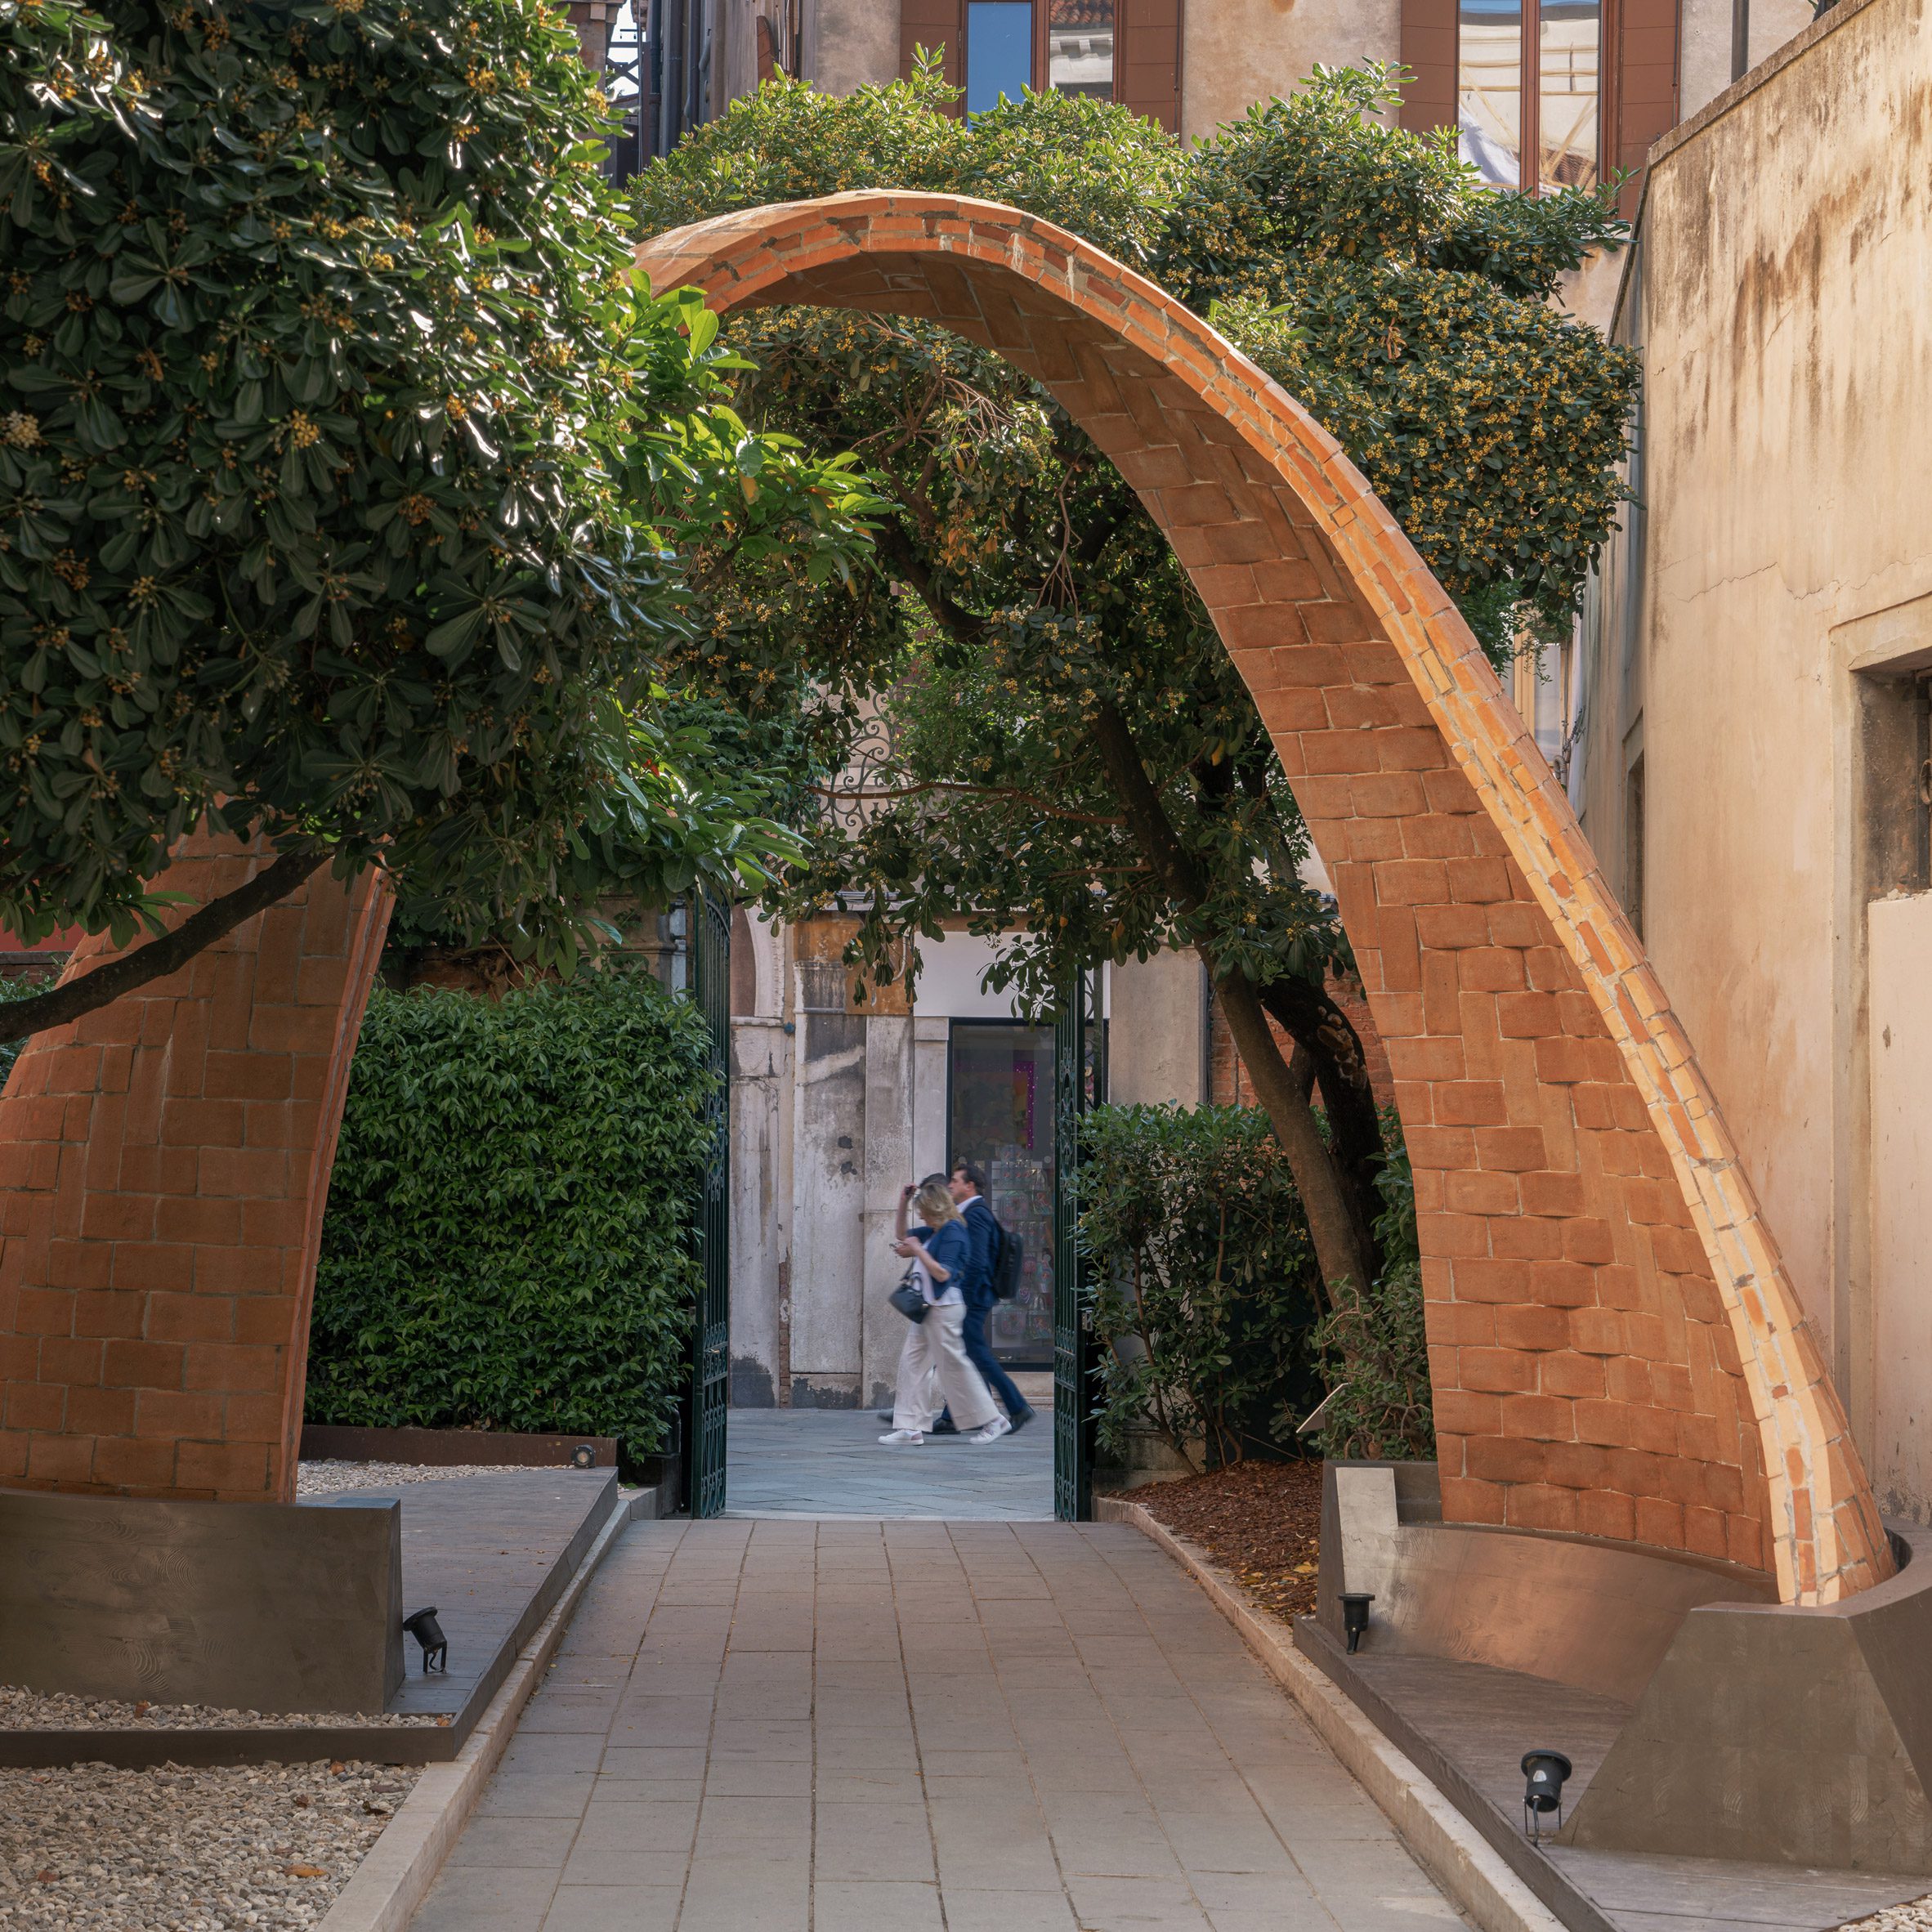 Photo of the arch in the entrance to the Time Space Existence exhibition in the Palazzo Mora gardens